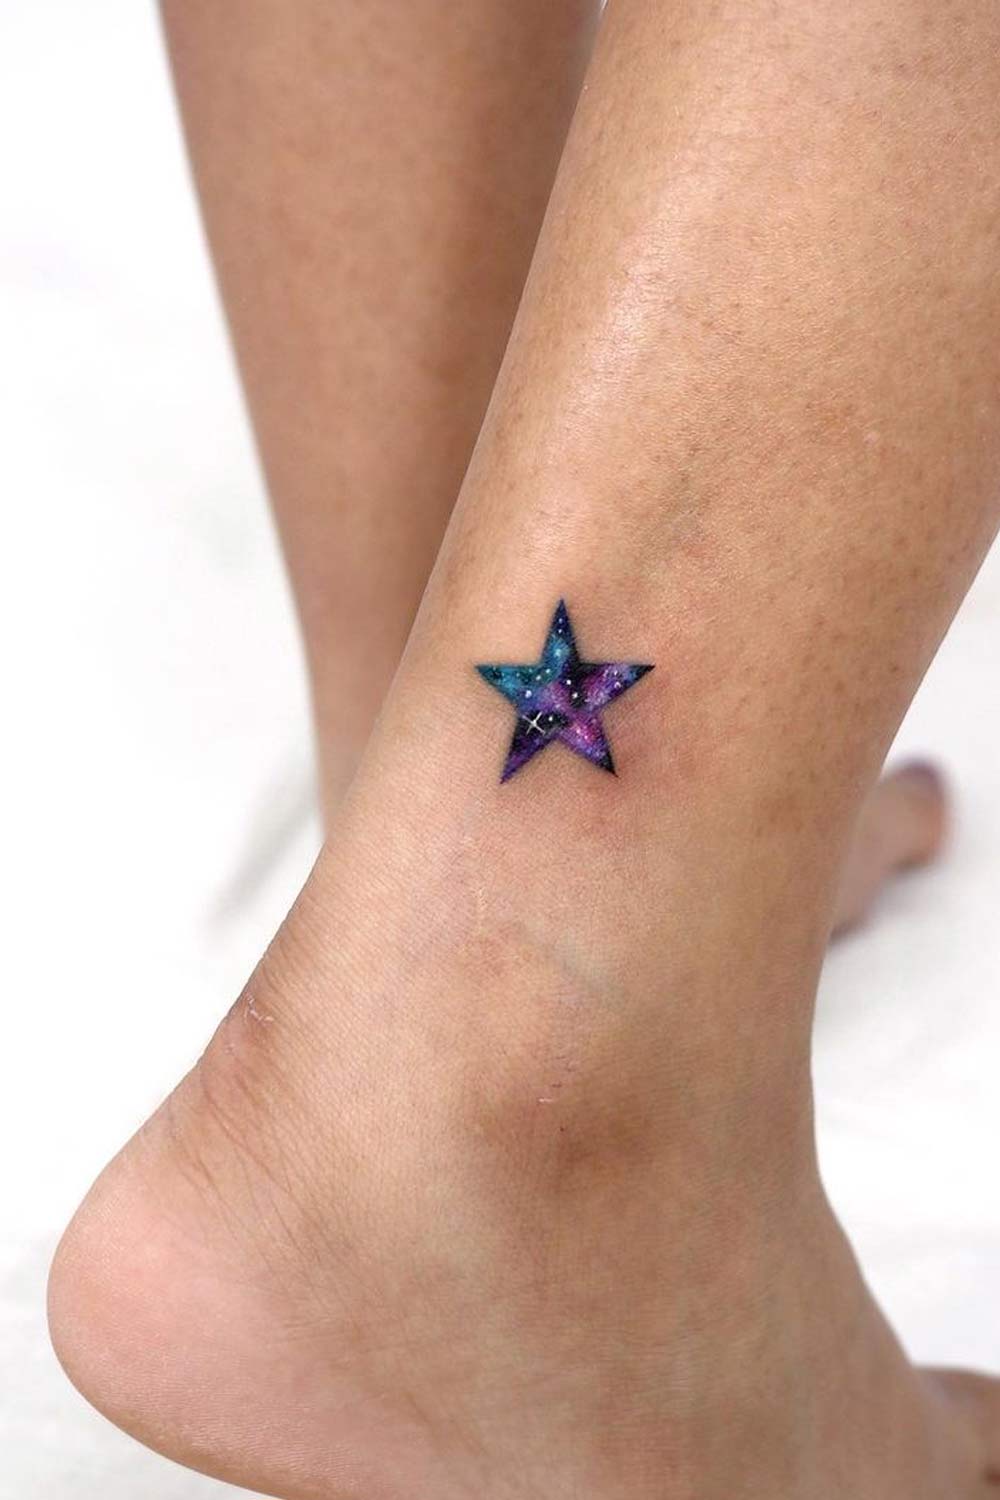 Popular Placements for Star Tattoo